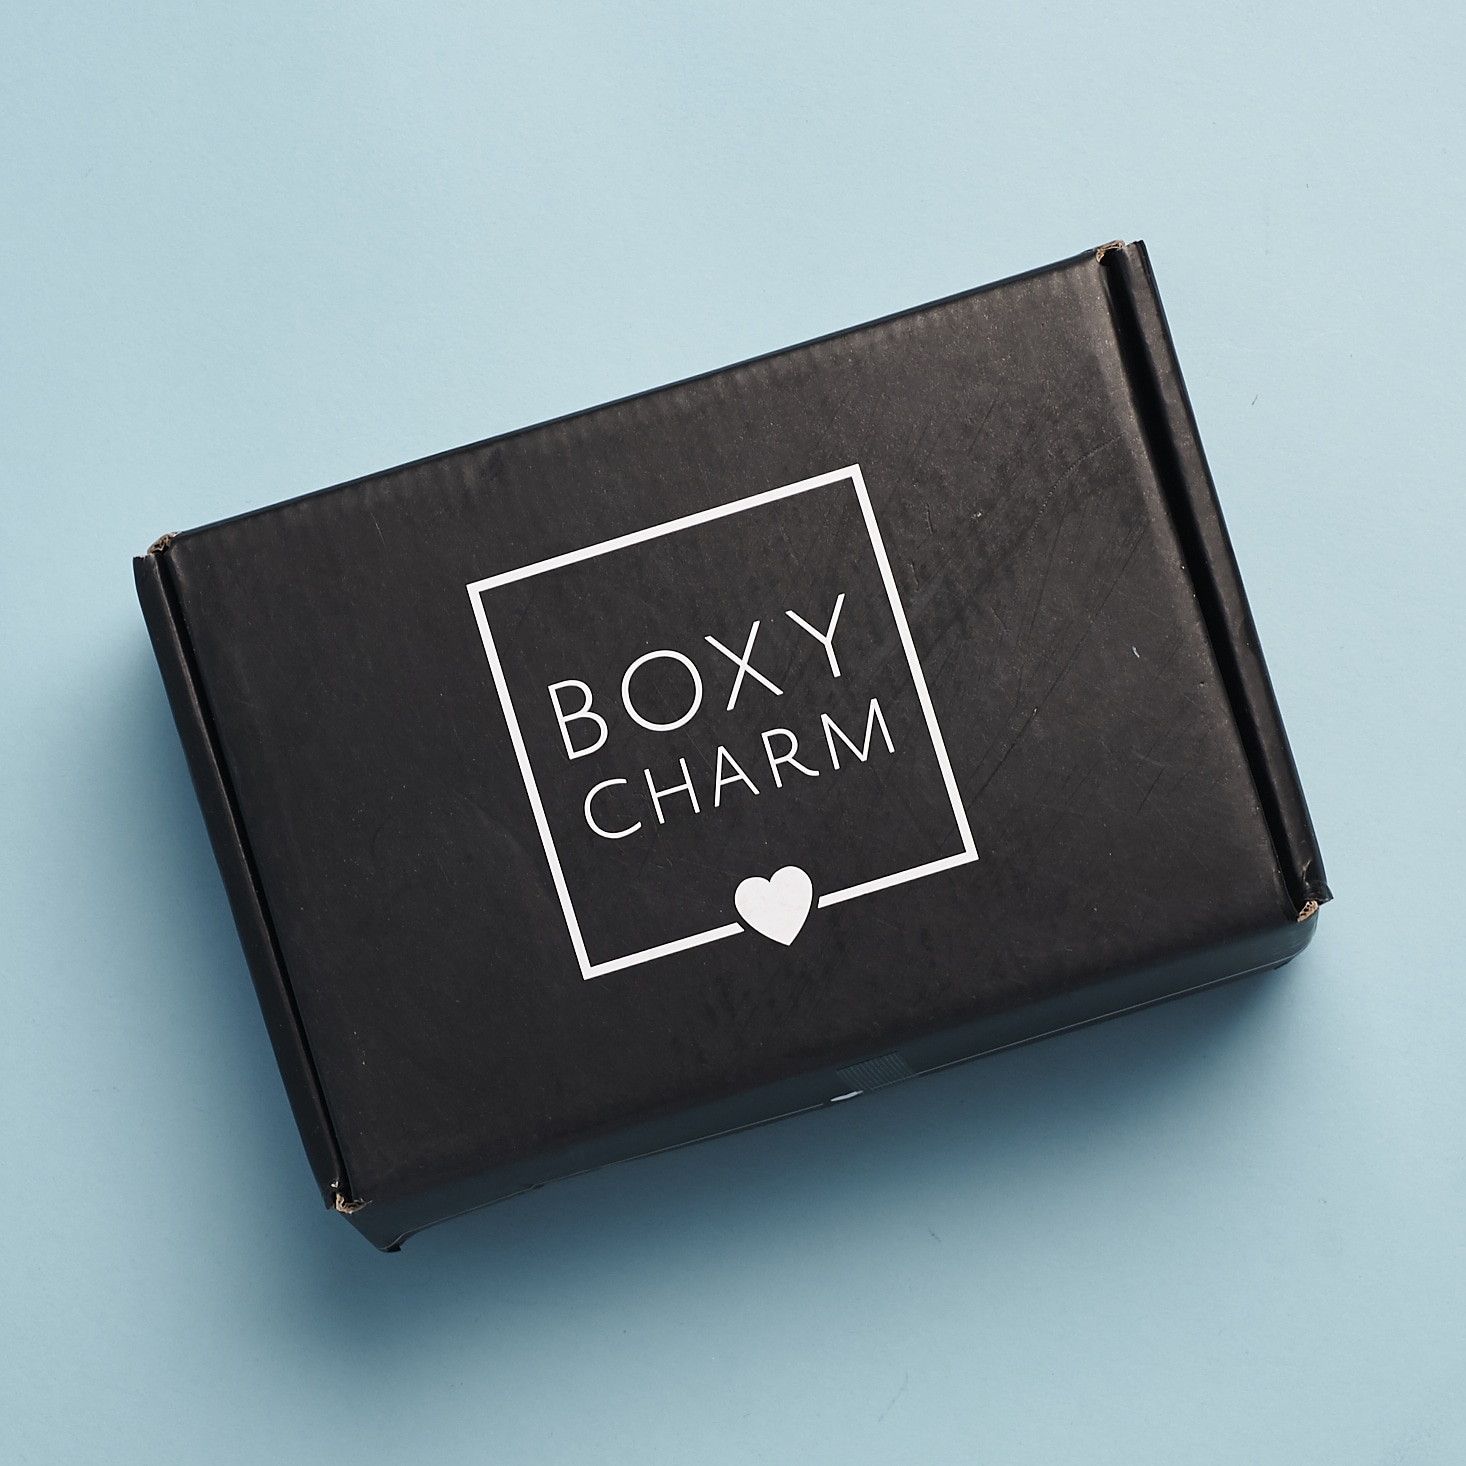 Boxycharm Subscriber Alert – The Charm Room is Now Open!